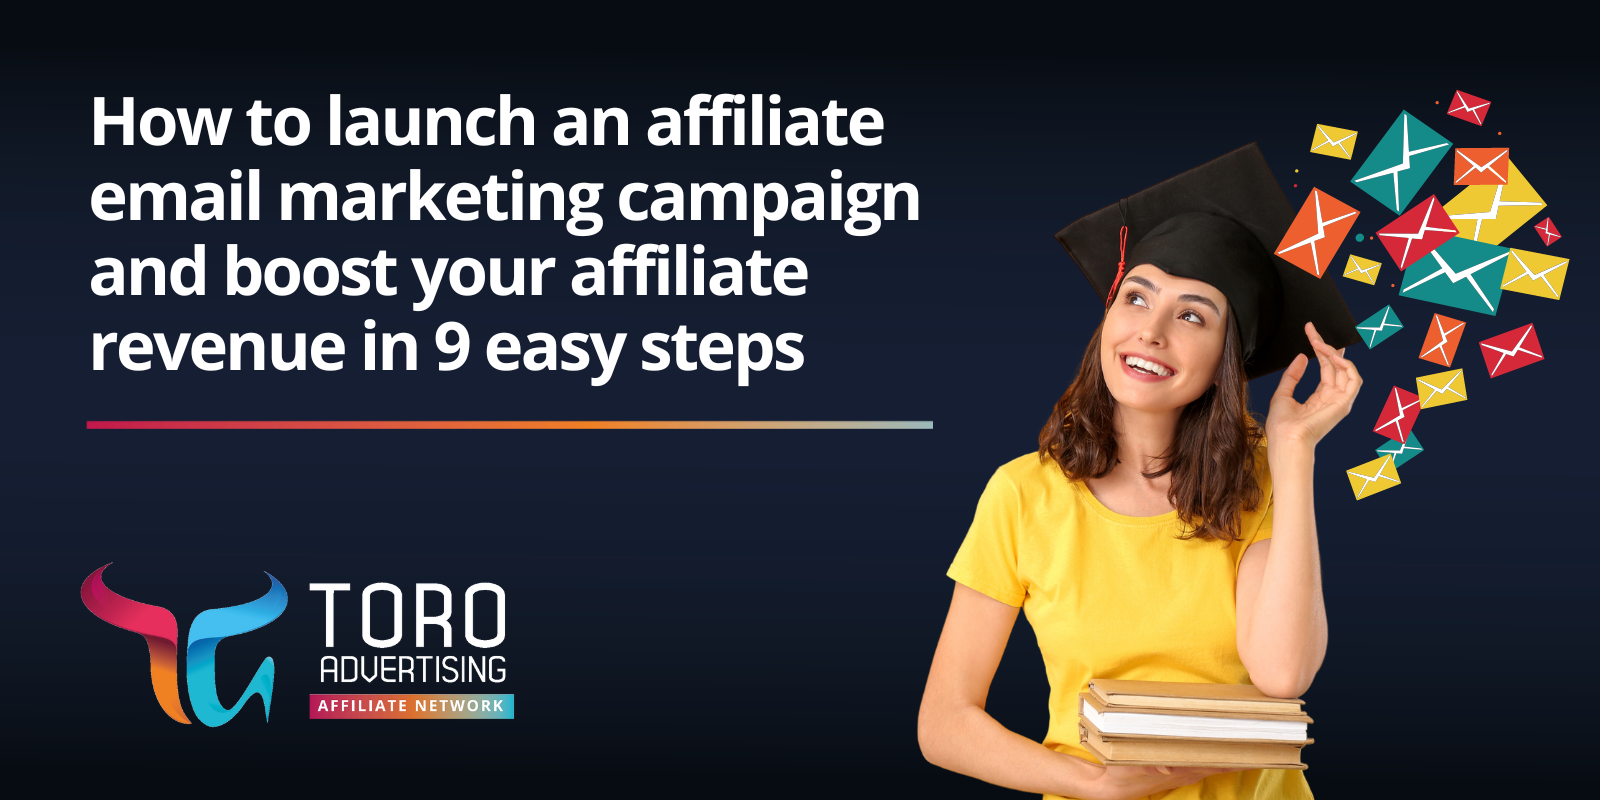 Affiliate email marketing for beginners with Toro: How to launch an affiliate email marketing campaign and boost your affiliate revenue in spain